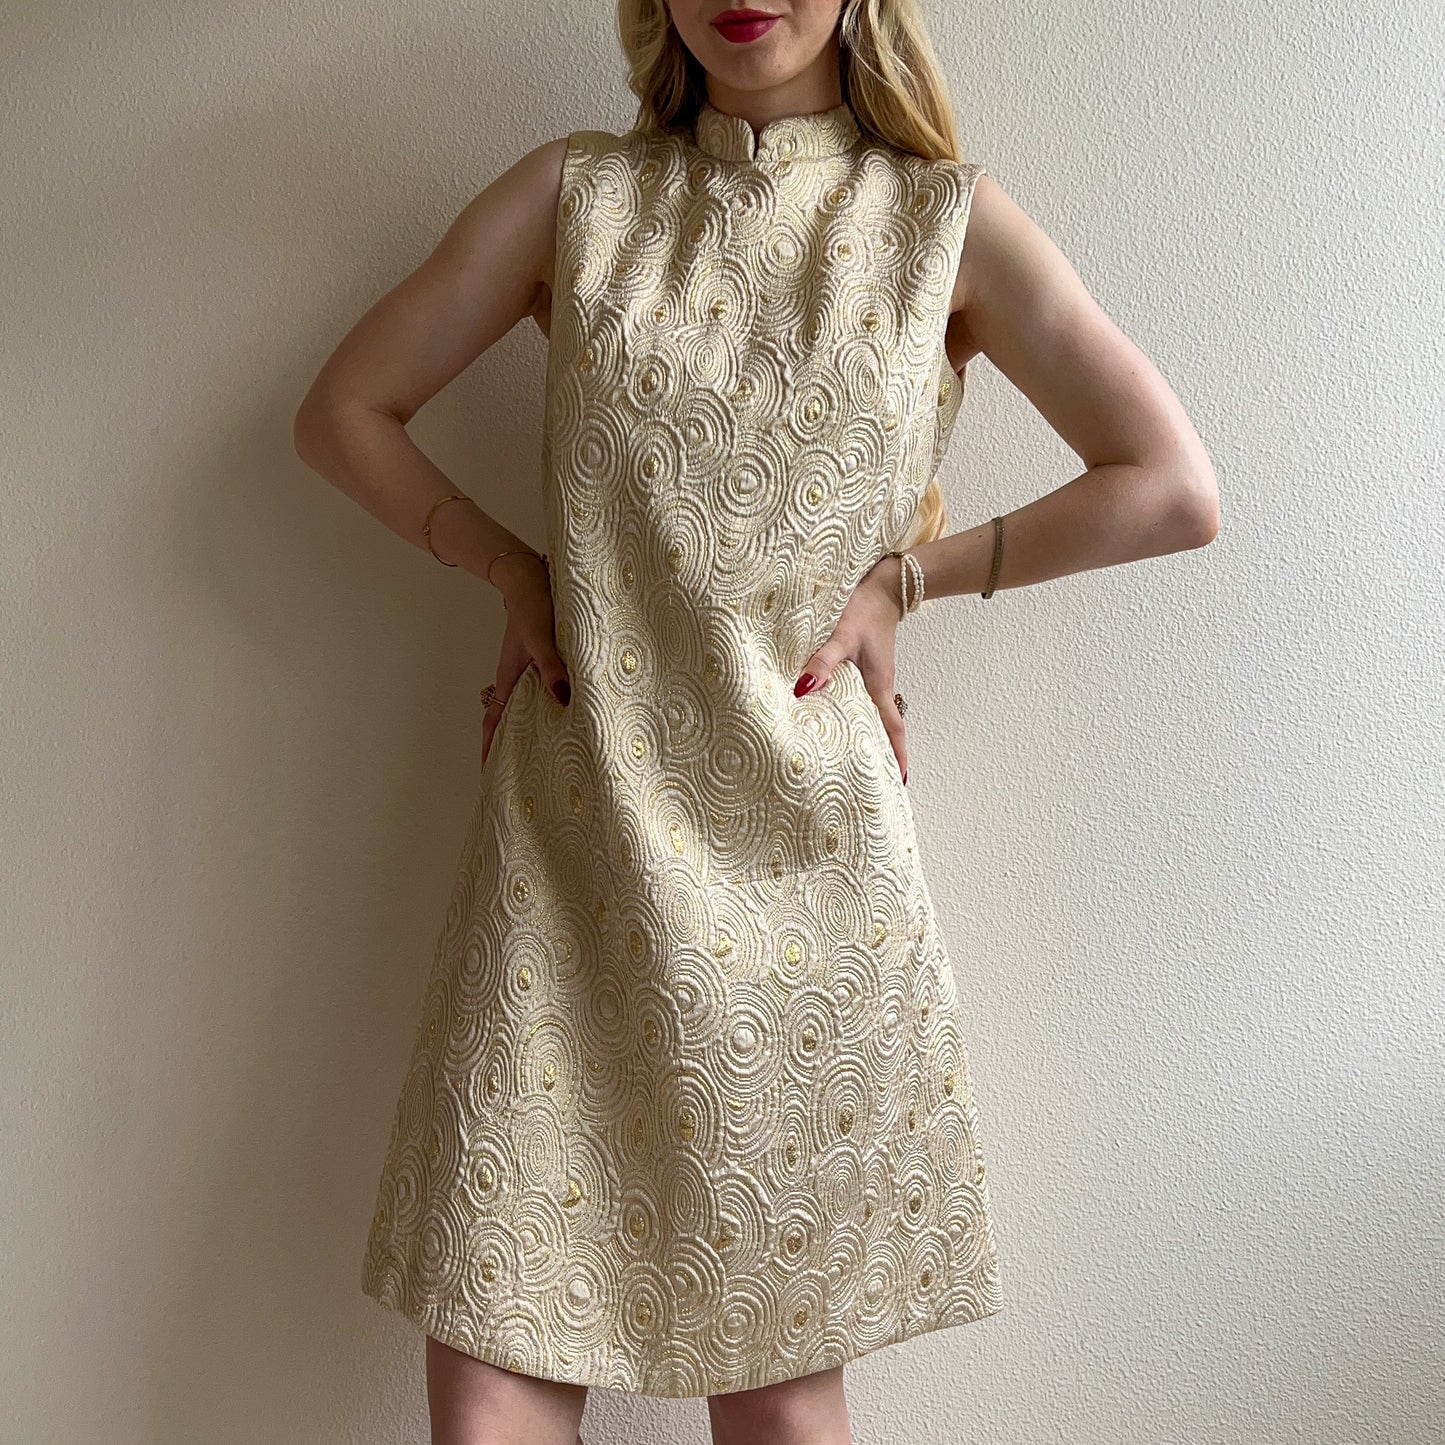 Stunning 1960s Silver and Gold Patterned Shift Dress (S/M)